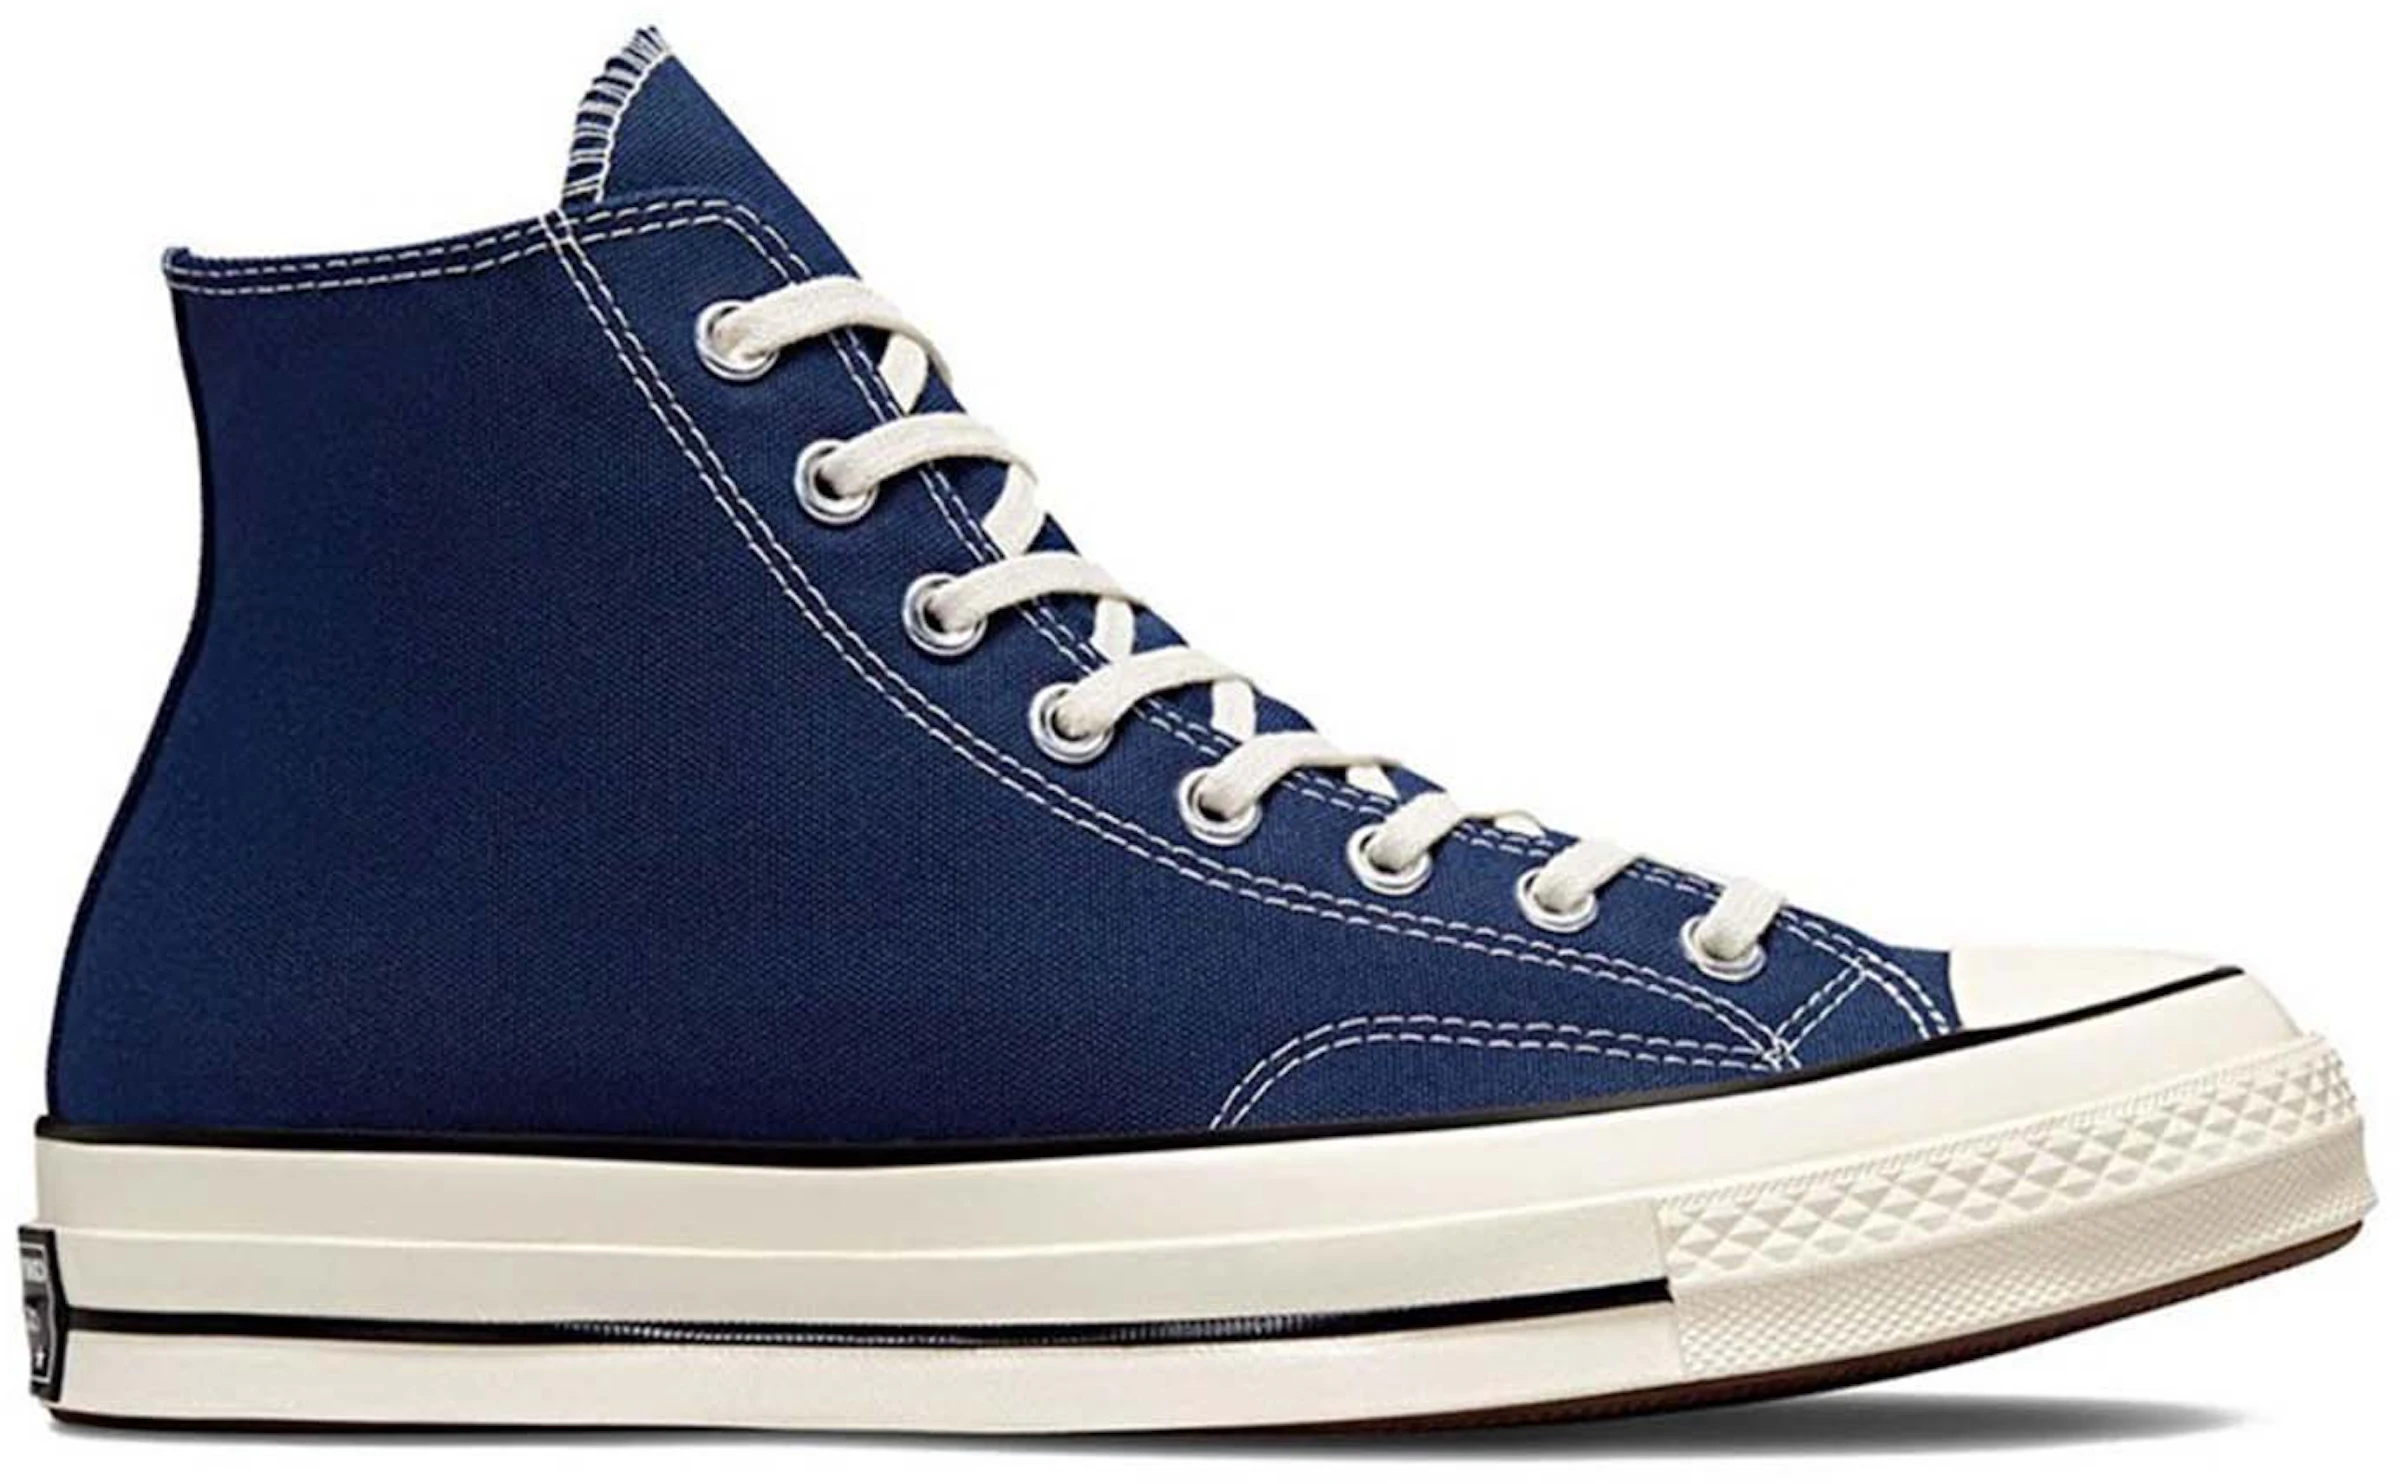 Converse Taylor All-Star 70 Hi Recycled Canvas Midnight Navy - 172676C - US